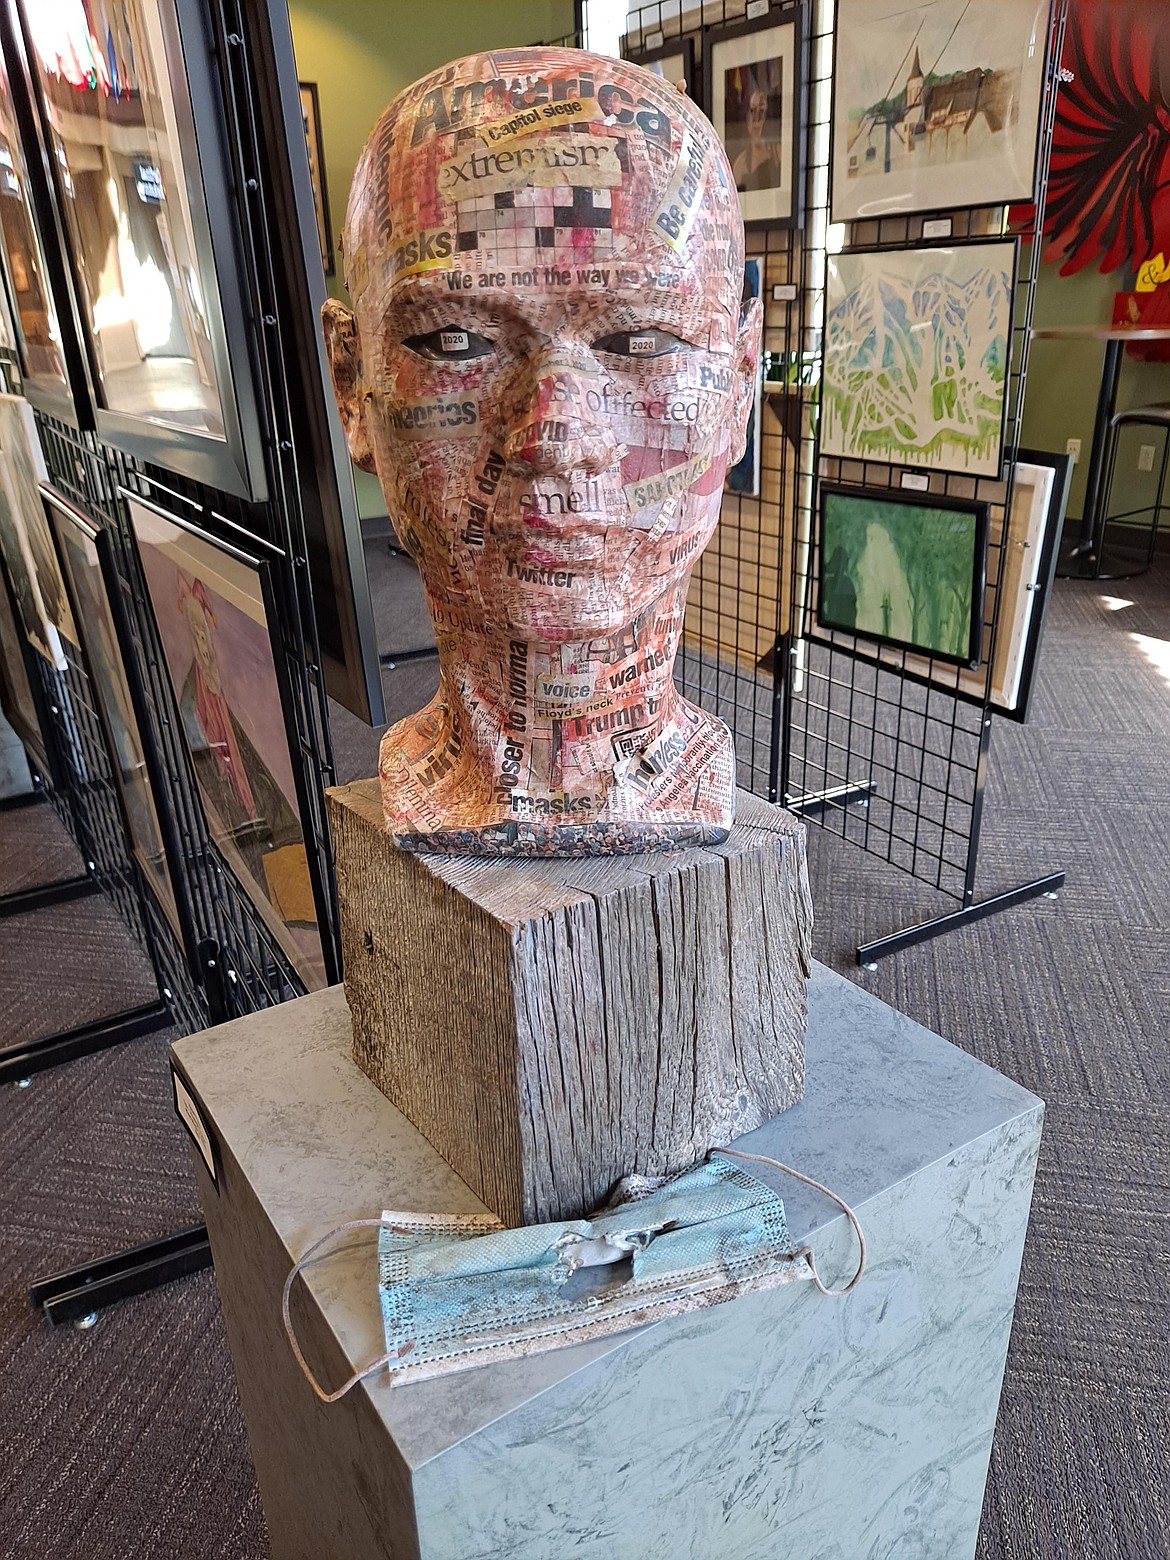 "Hindsight is 2020" by North Idaho College Aspiring Artists Club President Robert Perry is one of the pieces on display in the "Art in Full Bloom" show that runs through May 5.